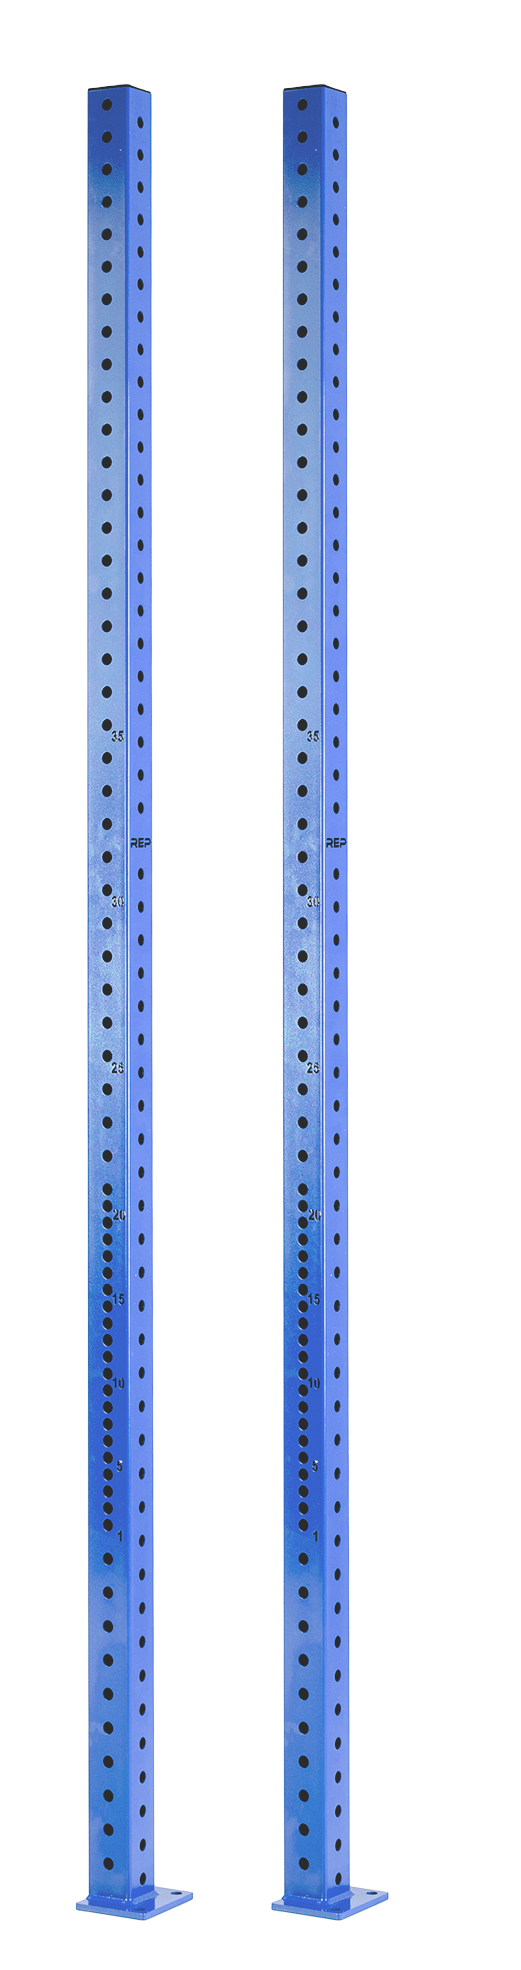 Rig Uprights - 4000 / Pair / Blue